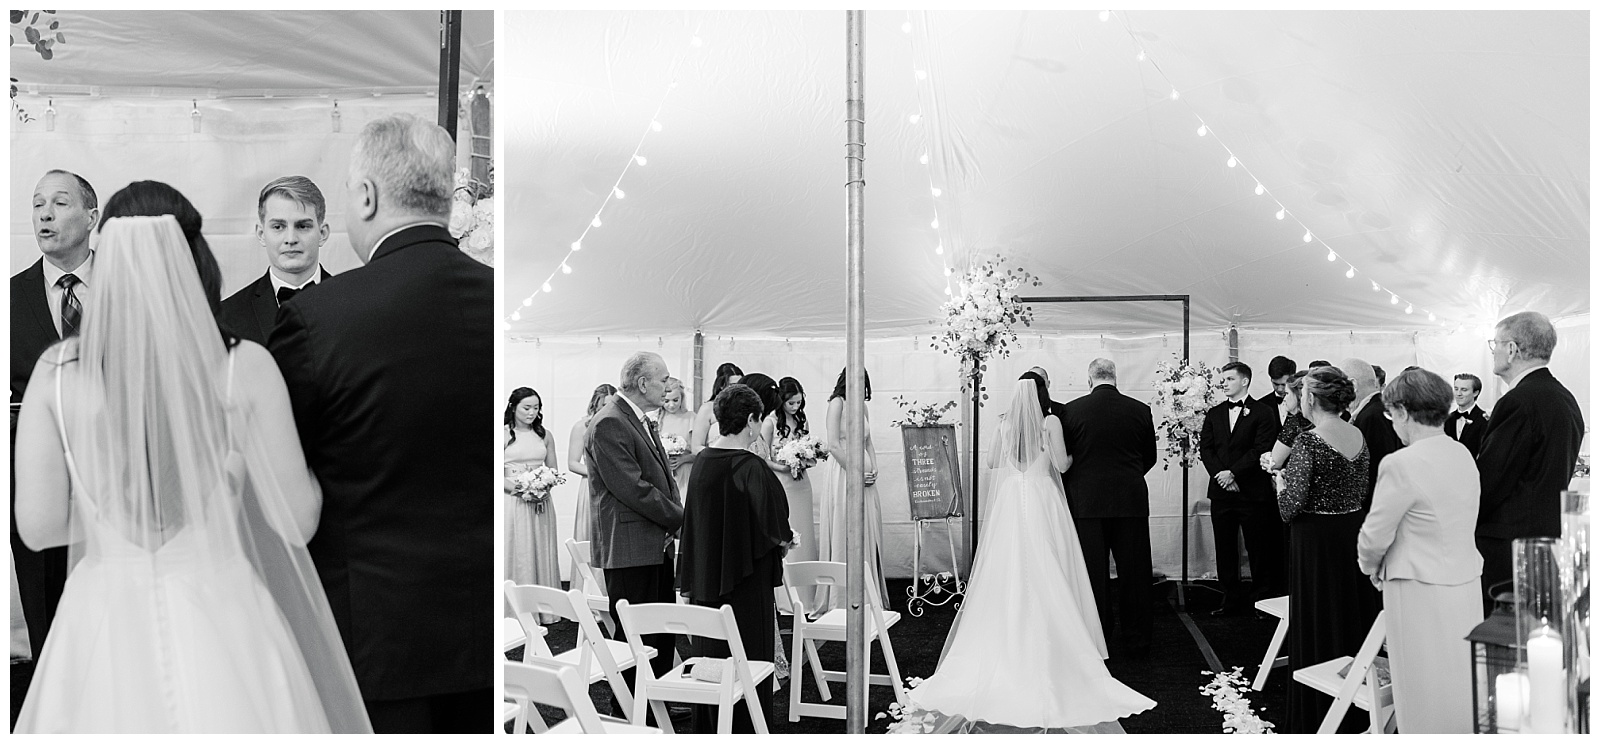 tented ceremony in black and white at intimate home wedding in west chester pa